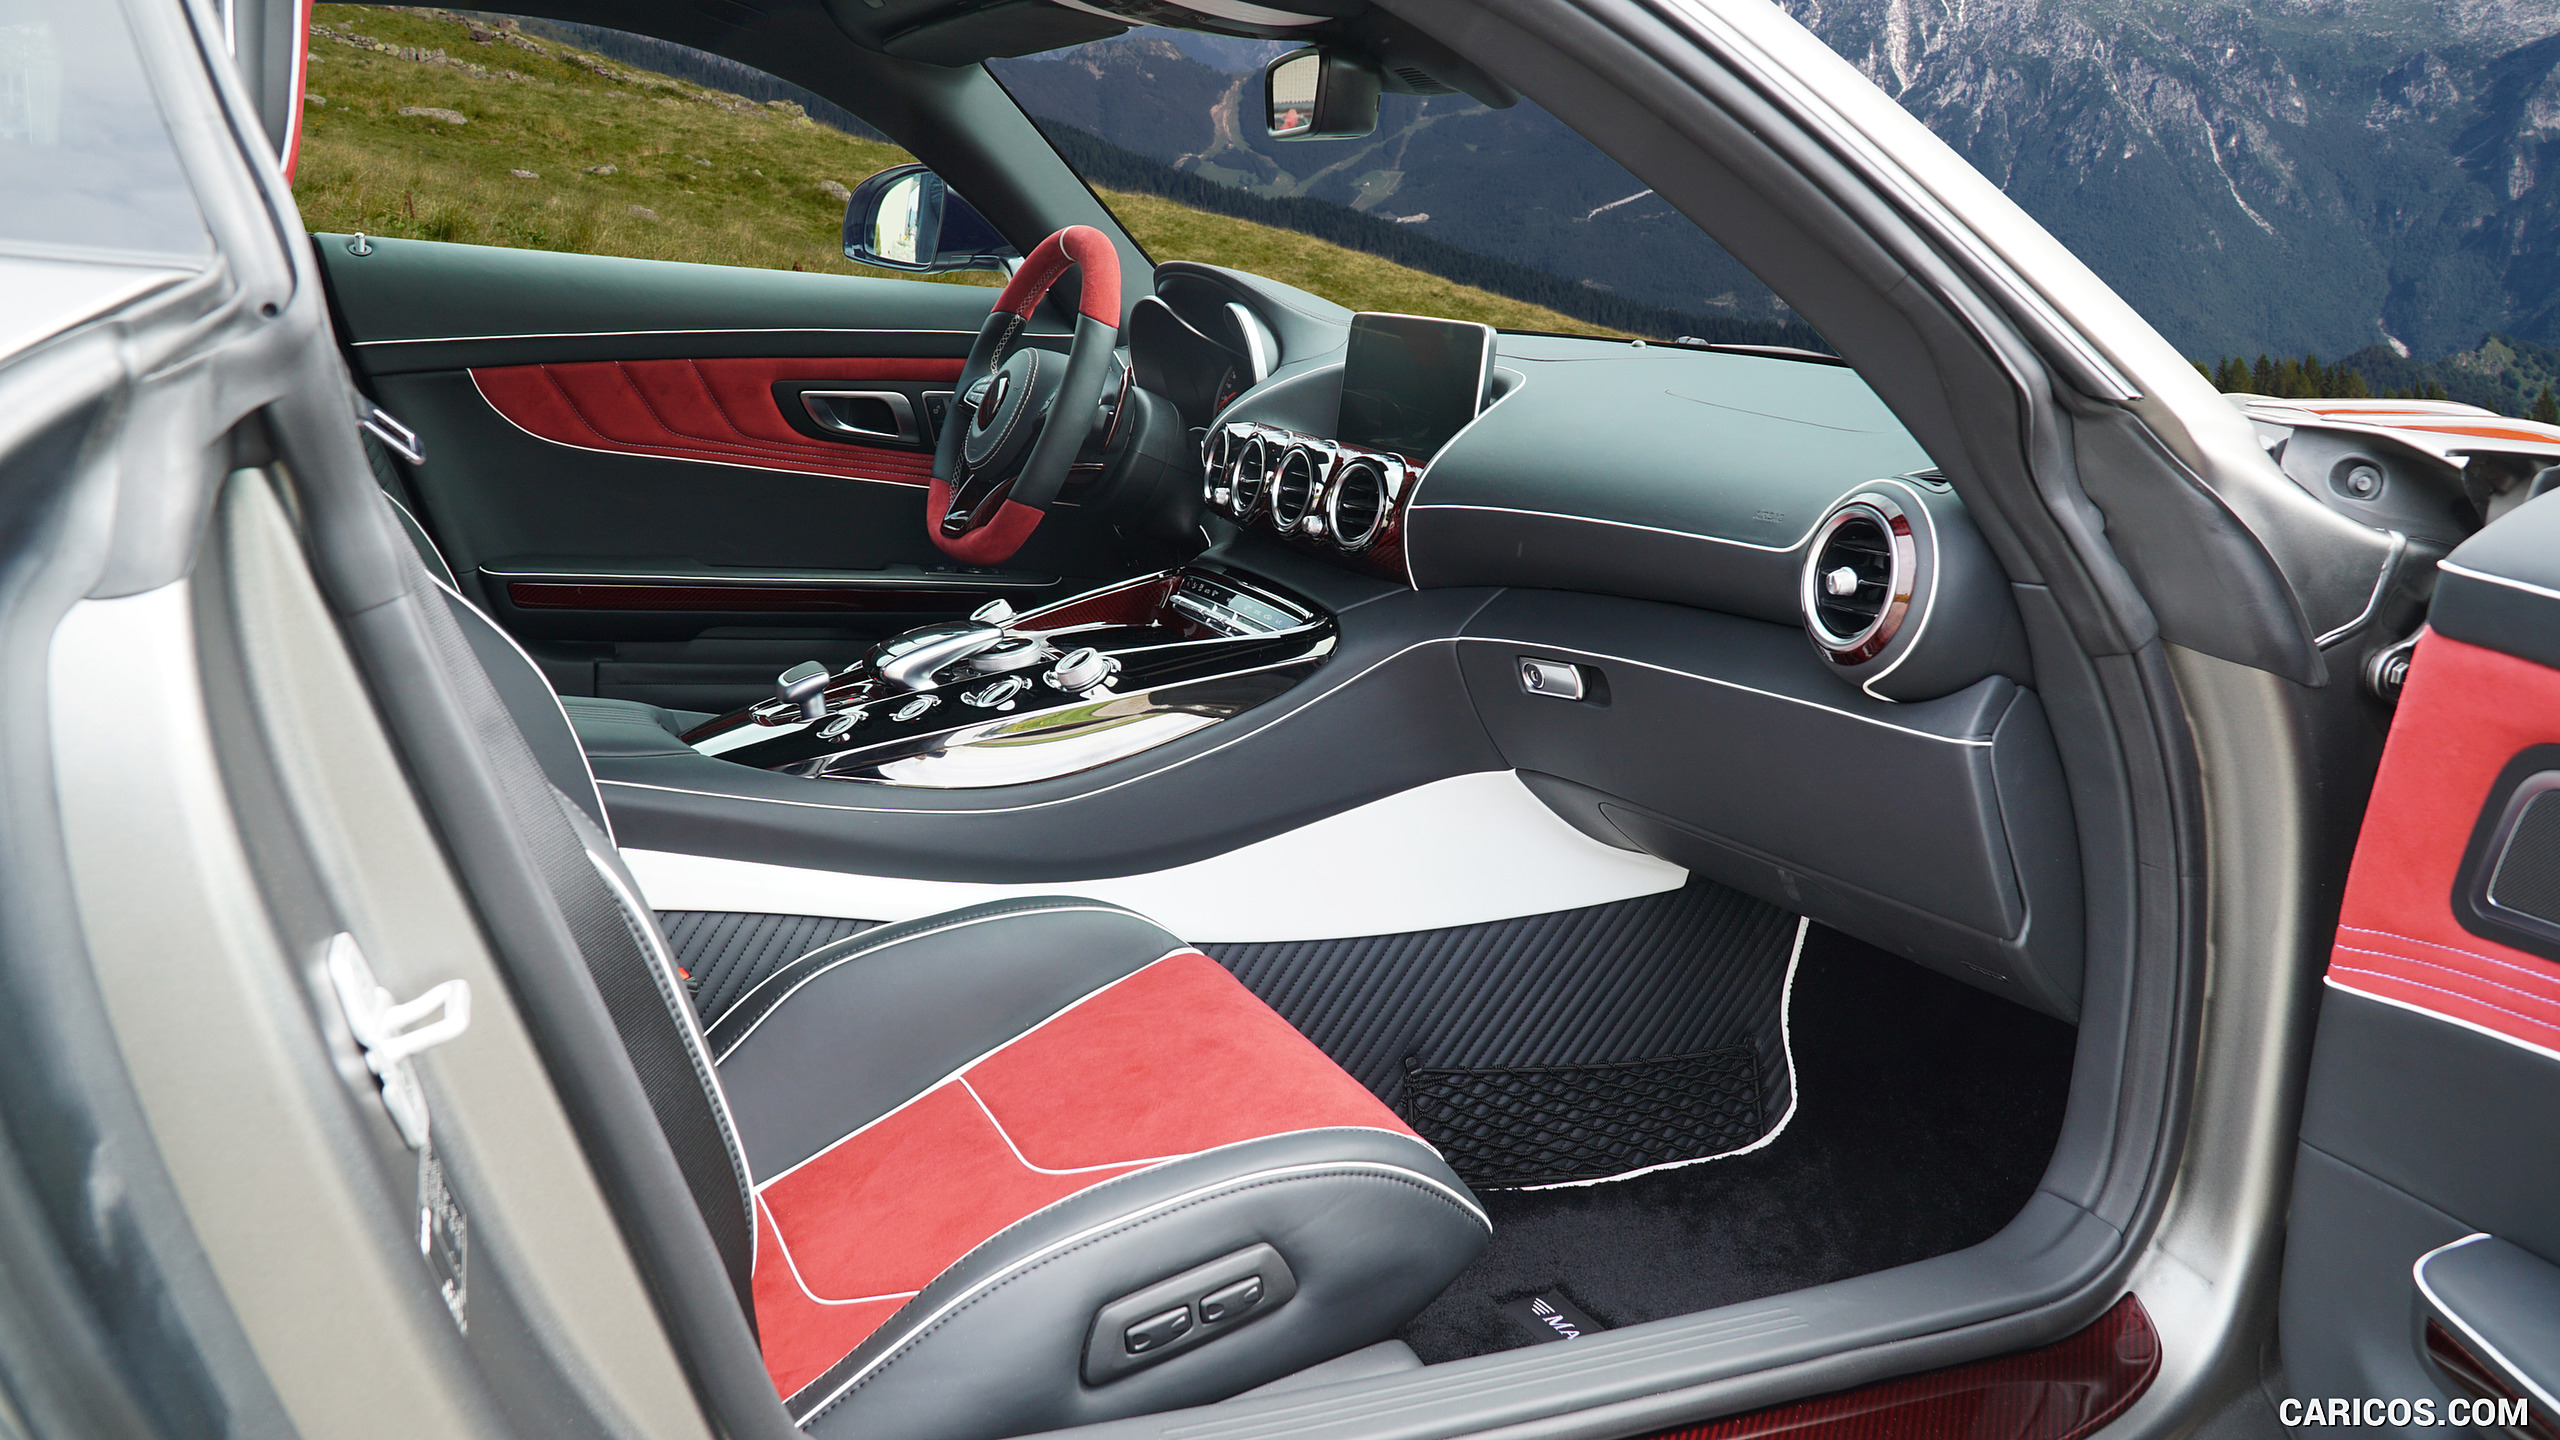 2016 MANSORY Mercedes-AMG GT S [One-Off] - Interior, #5 of 7